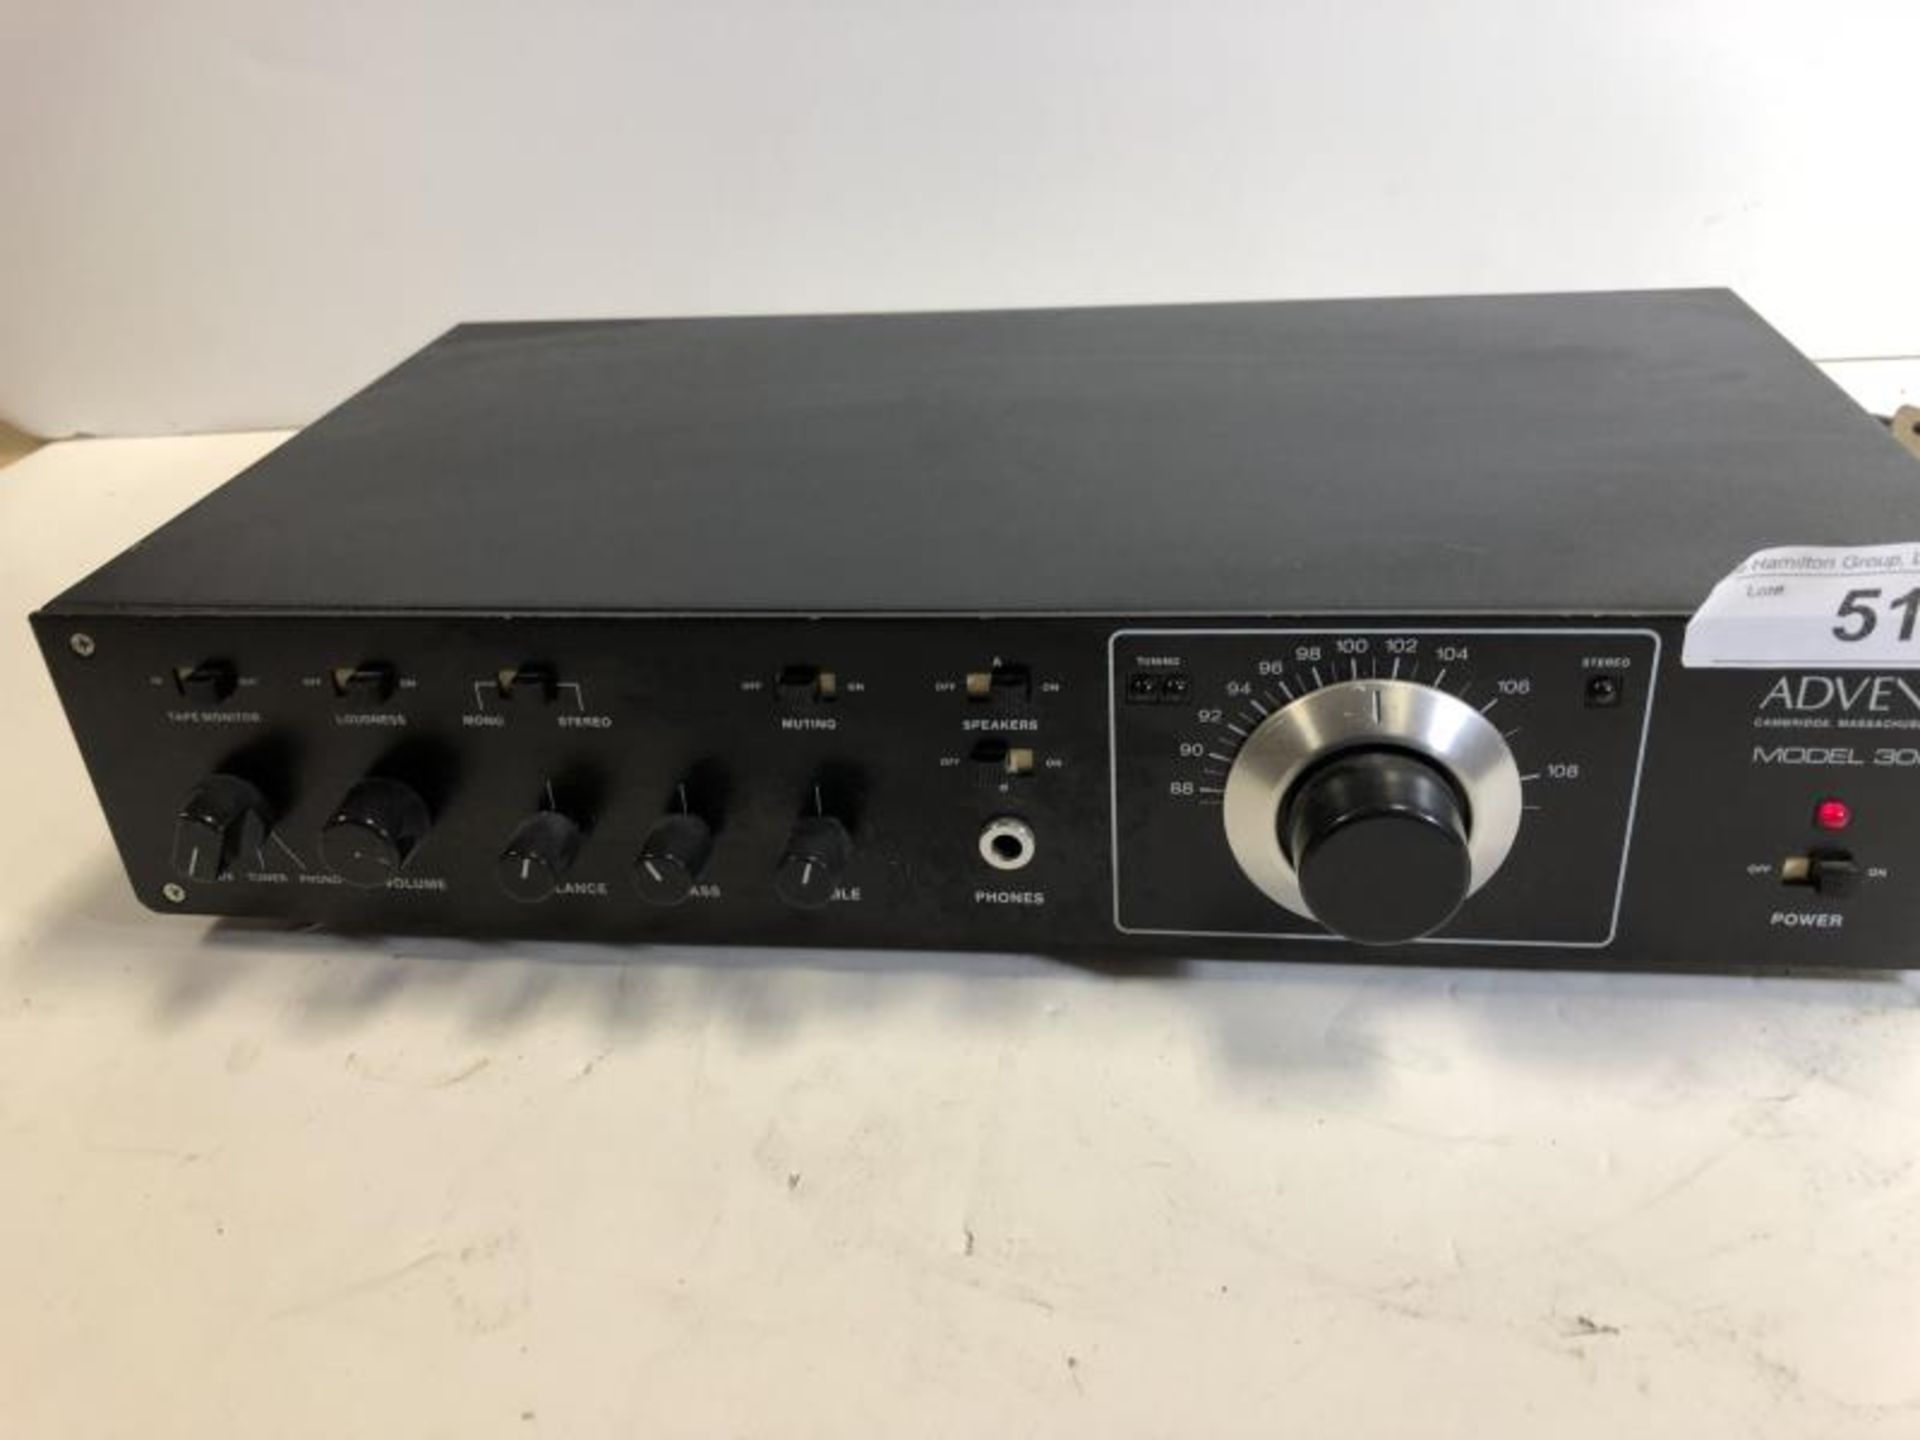 Advent Model 300 stereo tuner, tested - powers up